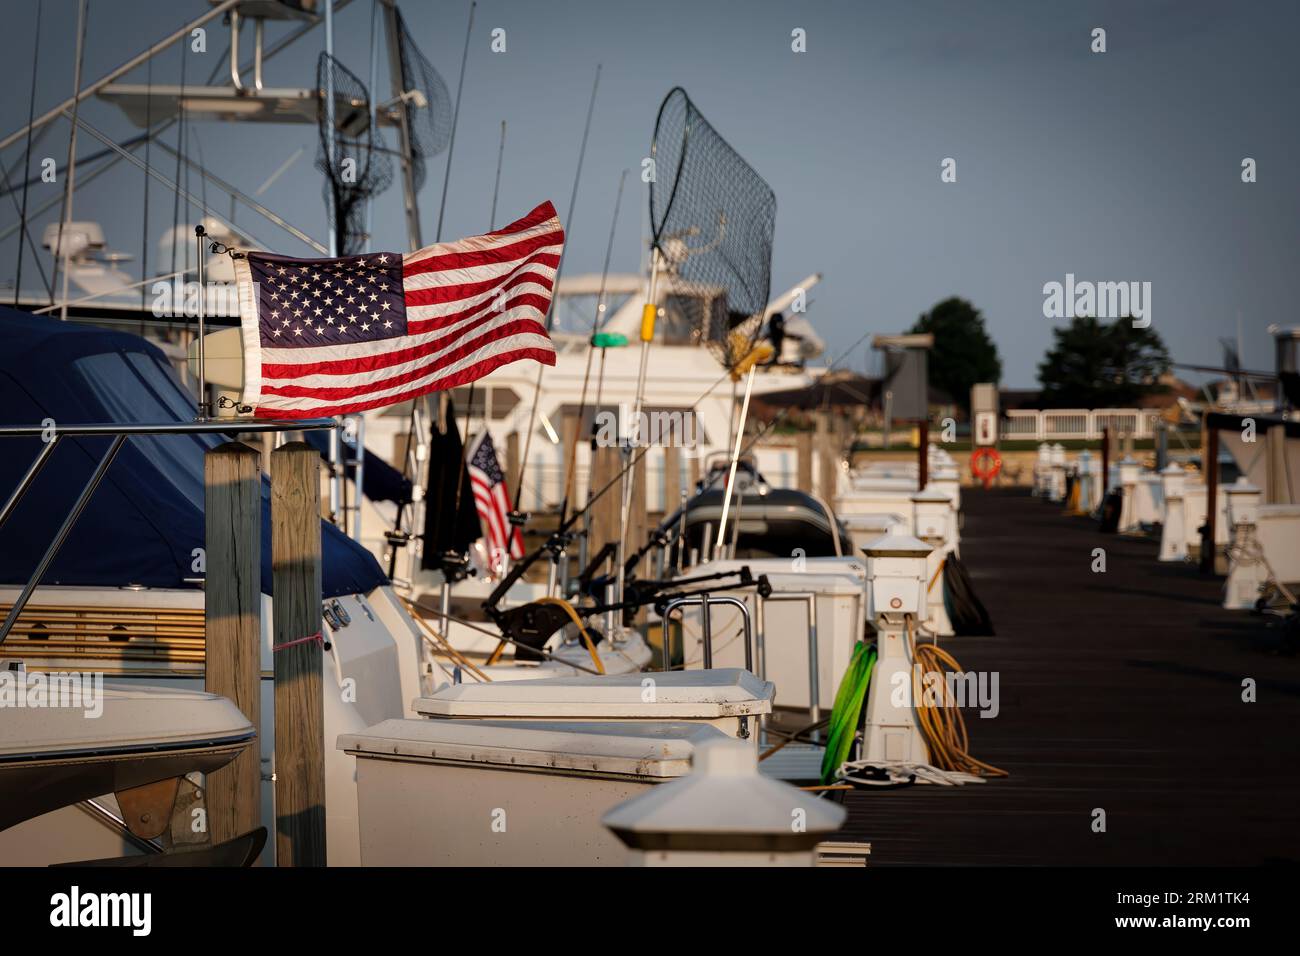 The sun rises on an American flag on the back of a boat in the harbor at Ludington, Michigan. Stock Photo